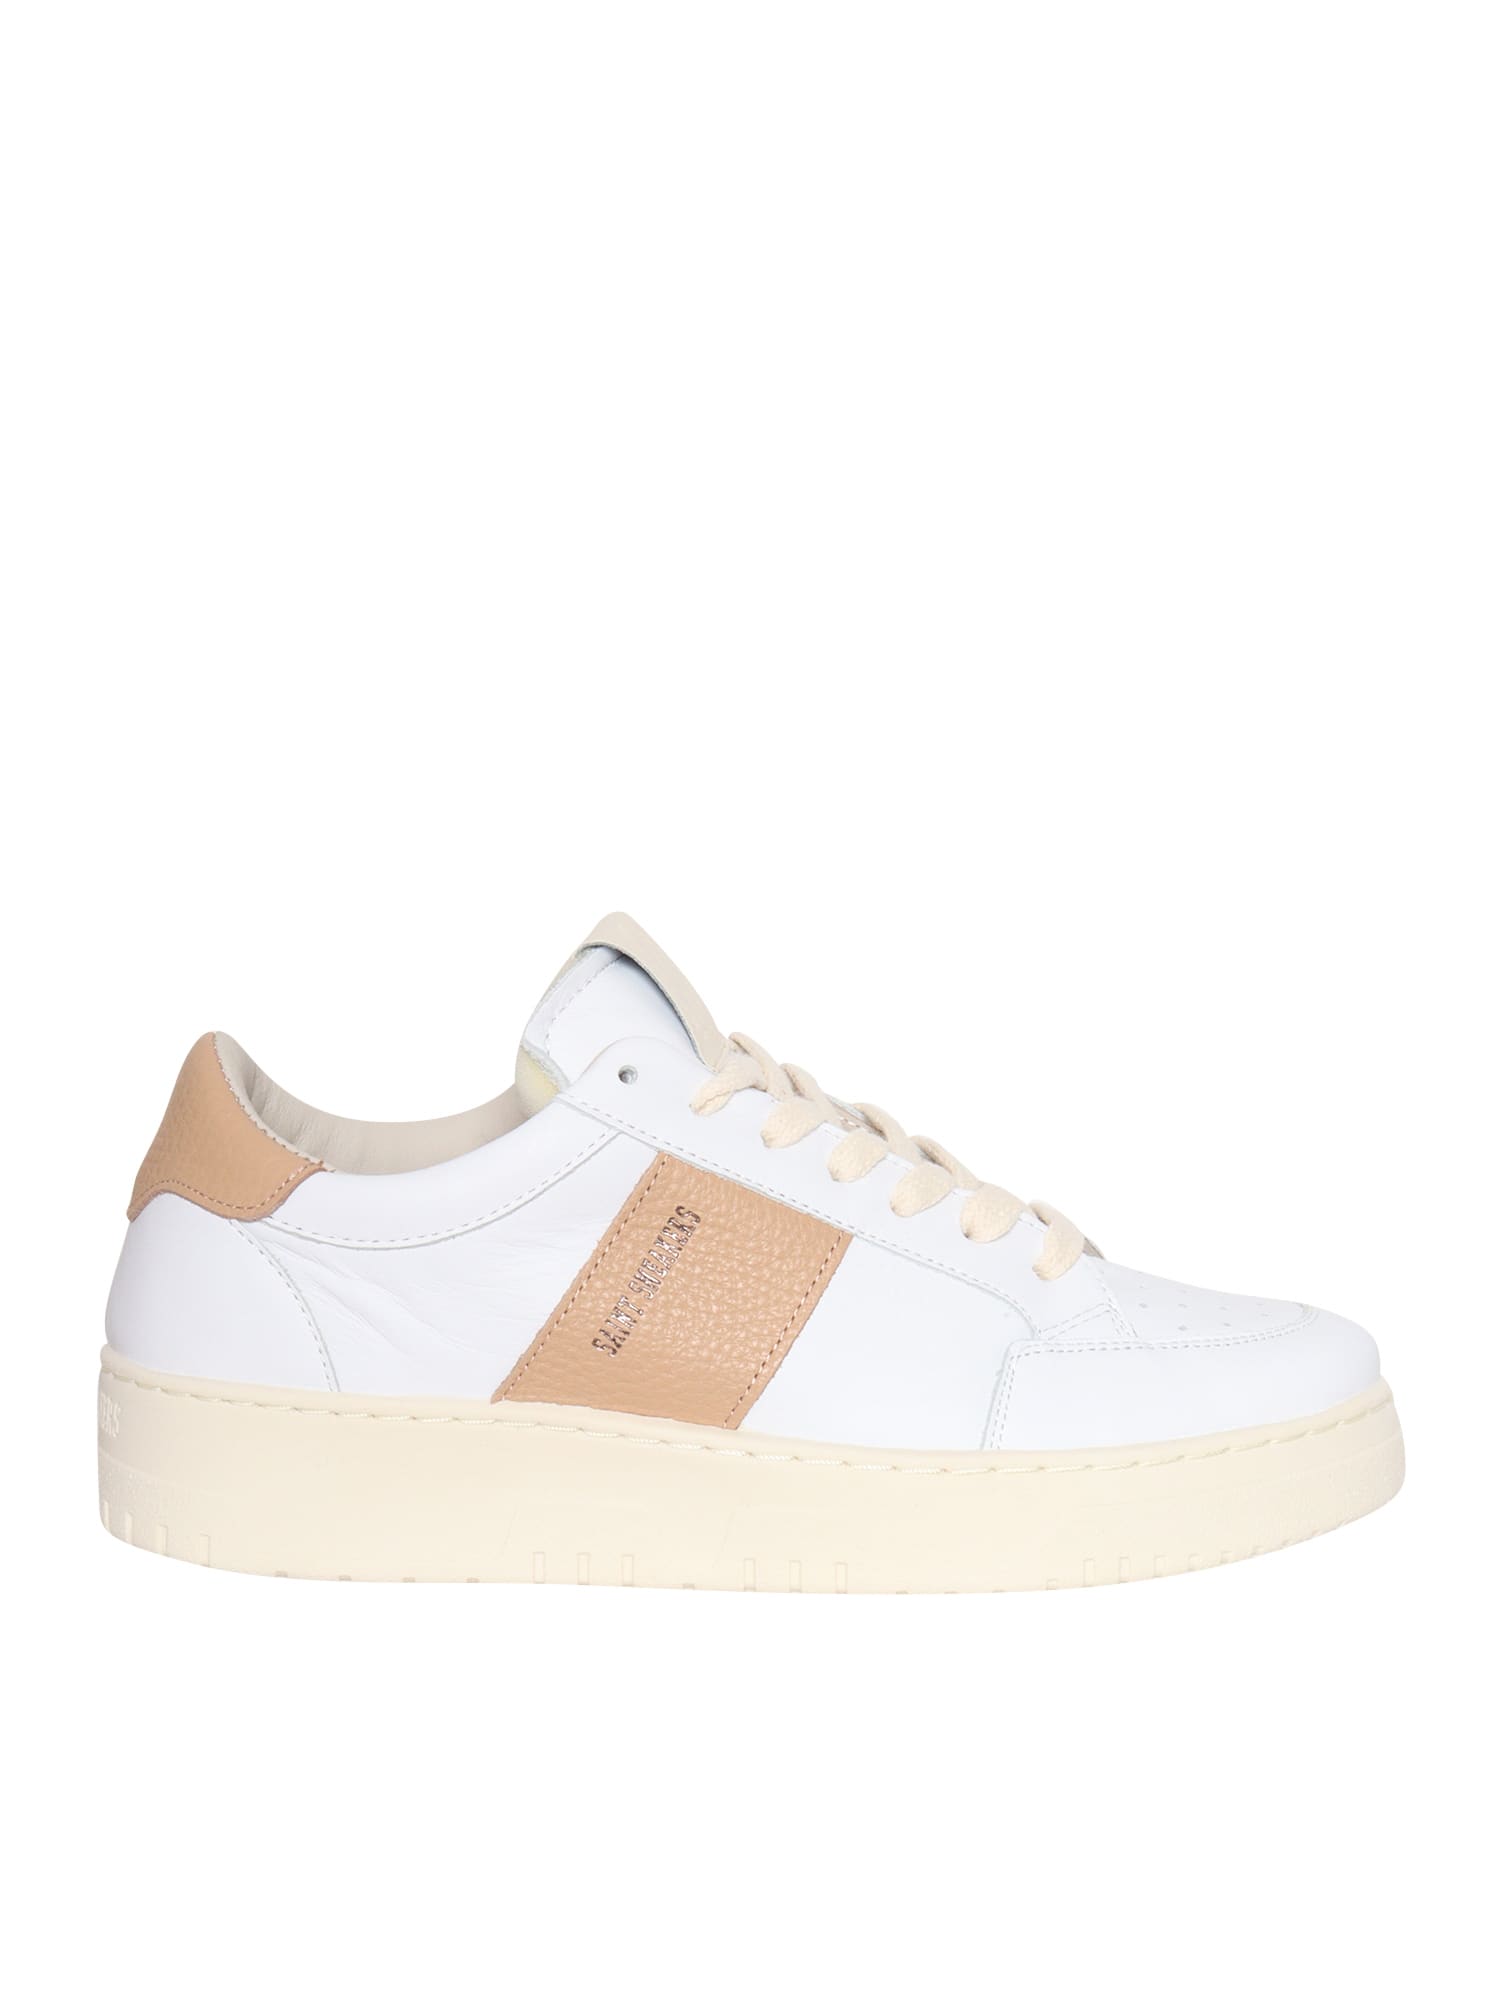 White And Pink Leather Tennis